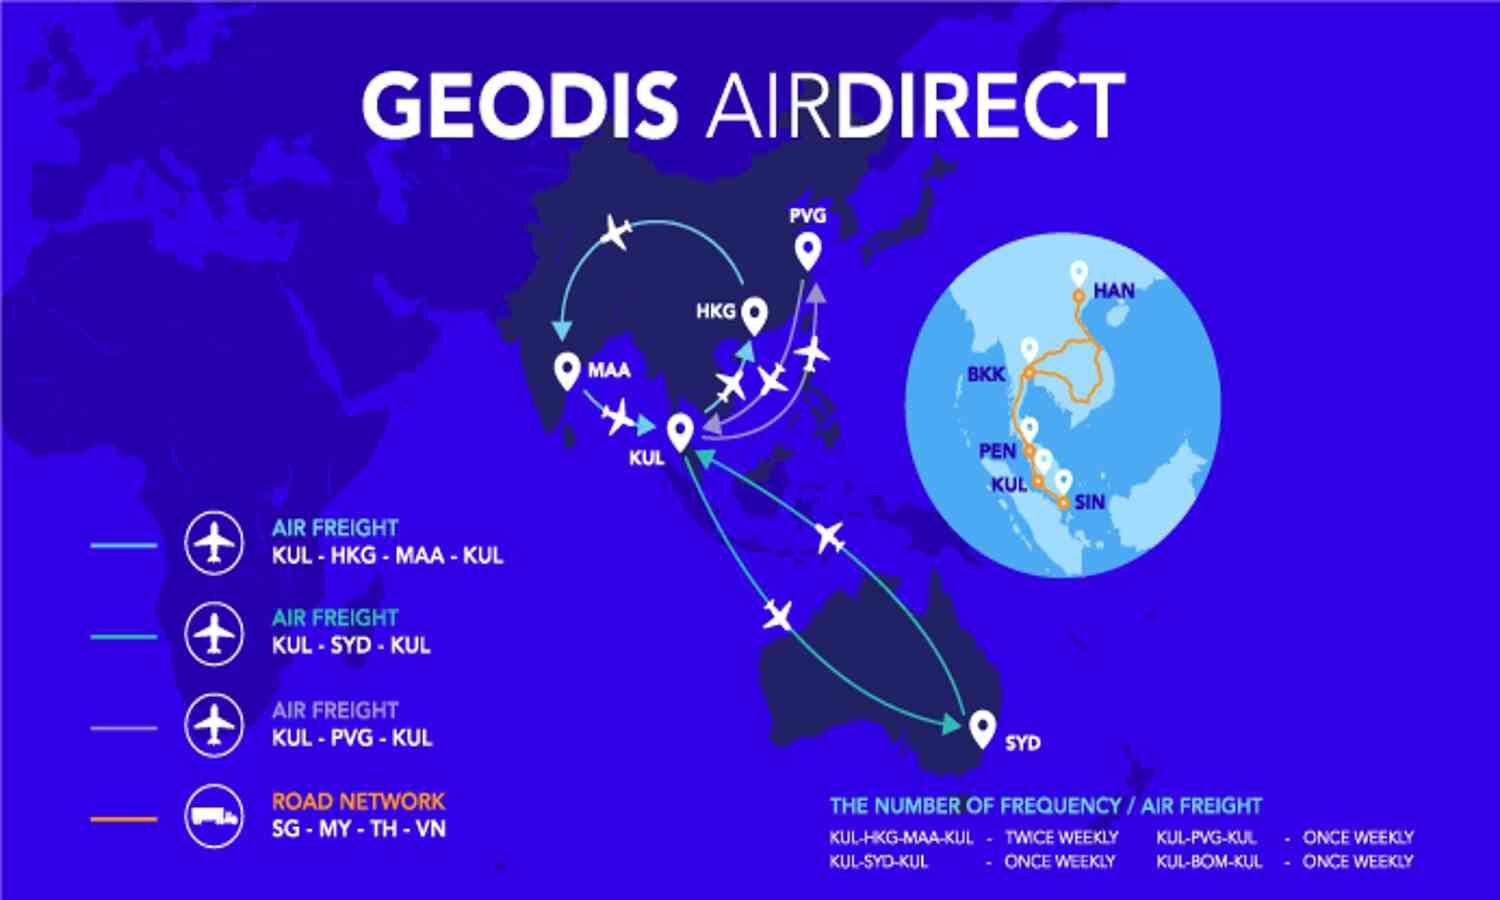 GEODIS expands AirDirect fleet; increases 320 tons of capacity weekly